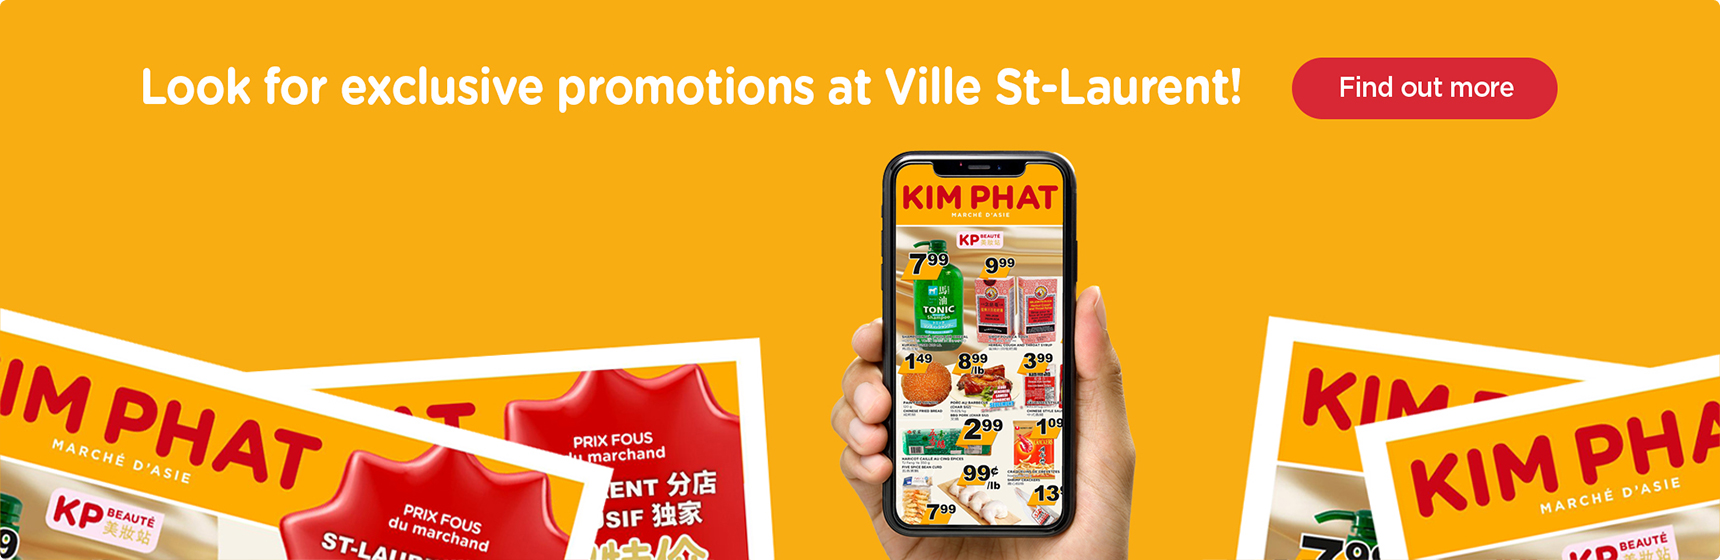 Look for exclusive promotions at Ville St-Laurent!